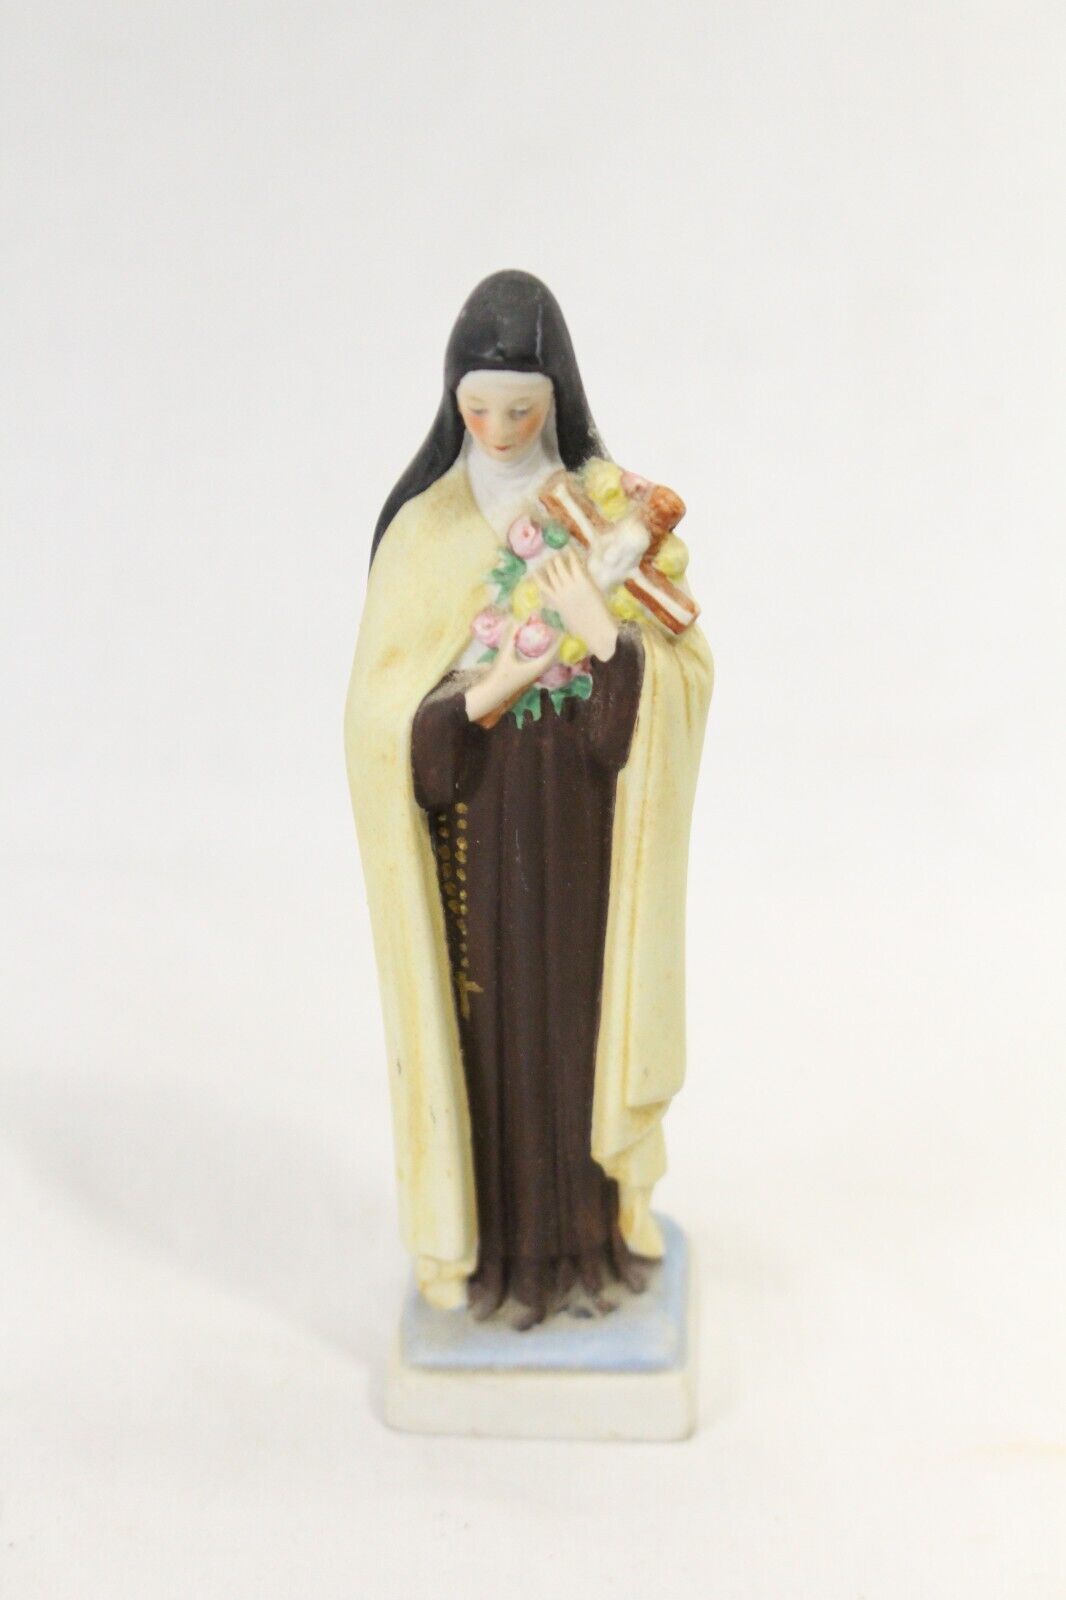 Vintage  Statue of St. Therese Lisieux, 